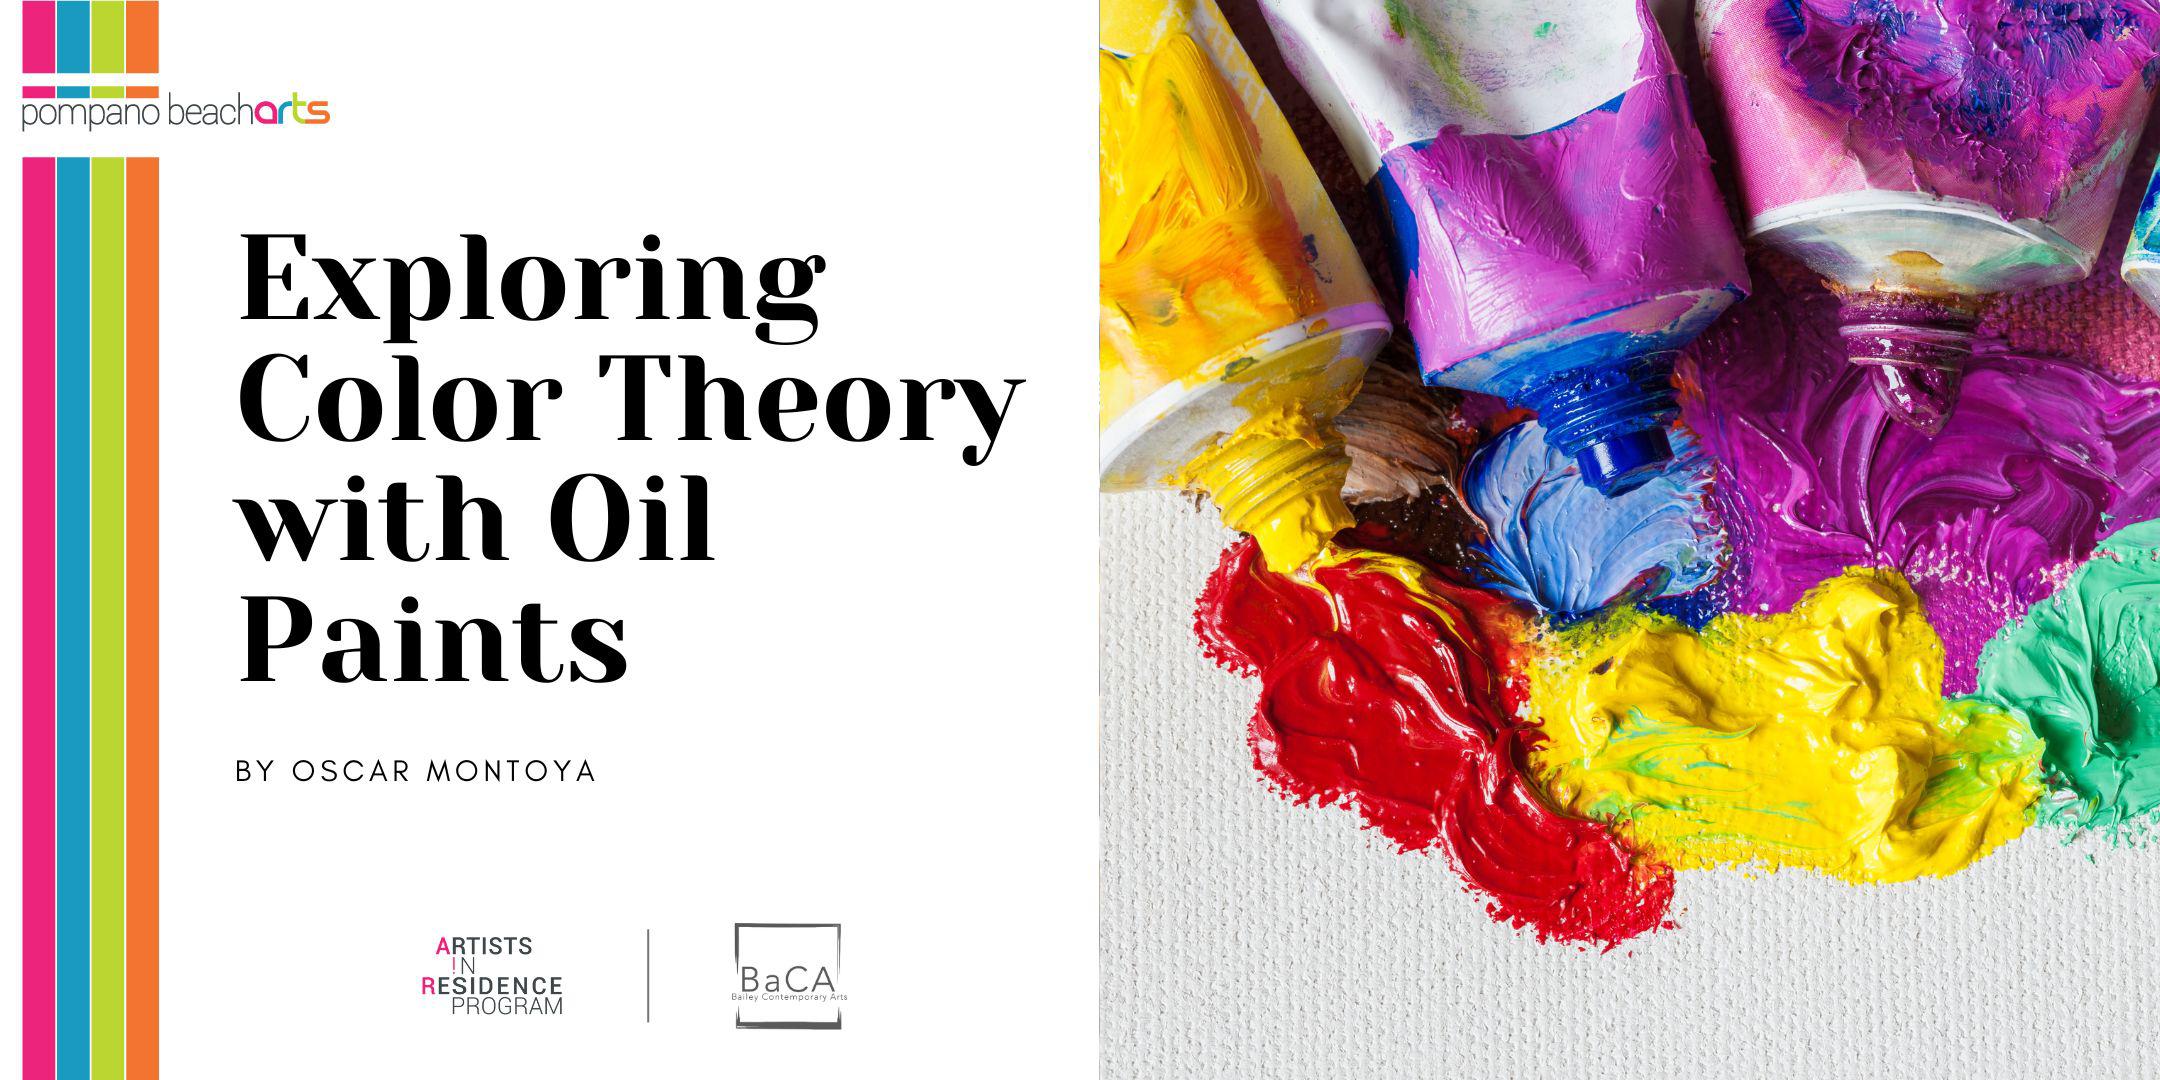 Exploring Color Theory with Oil Paints Workshop Series Tickets, Multiple  Dates